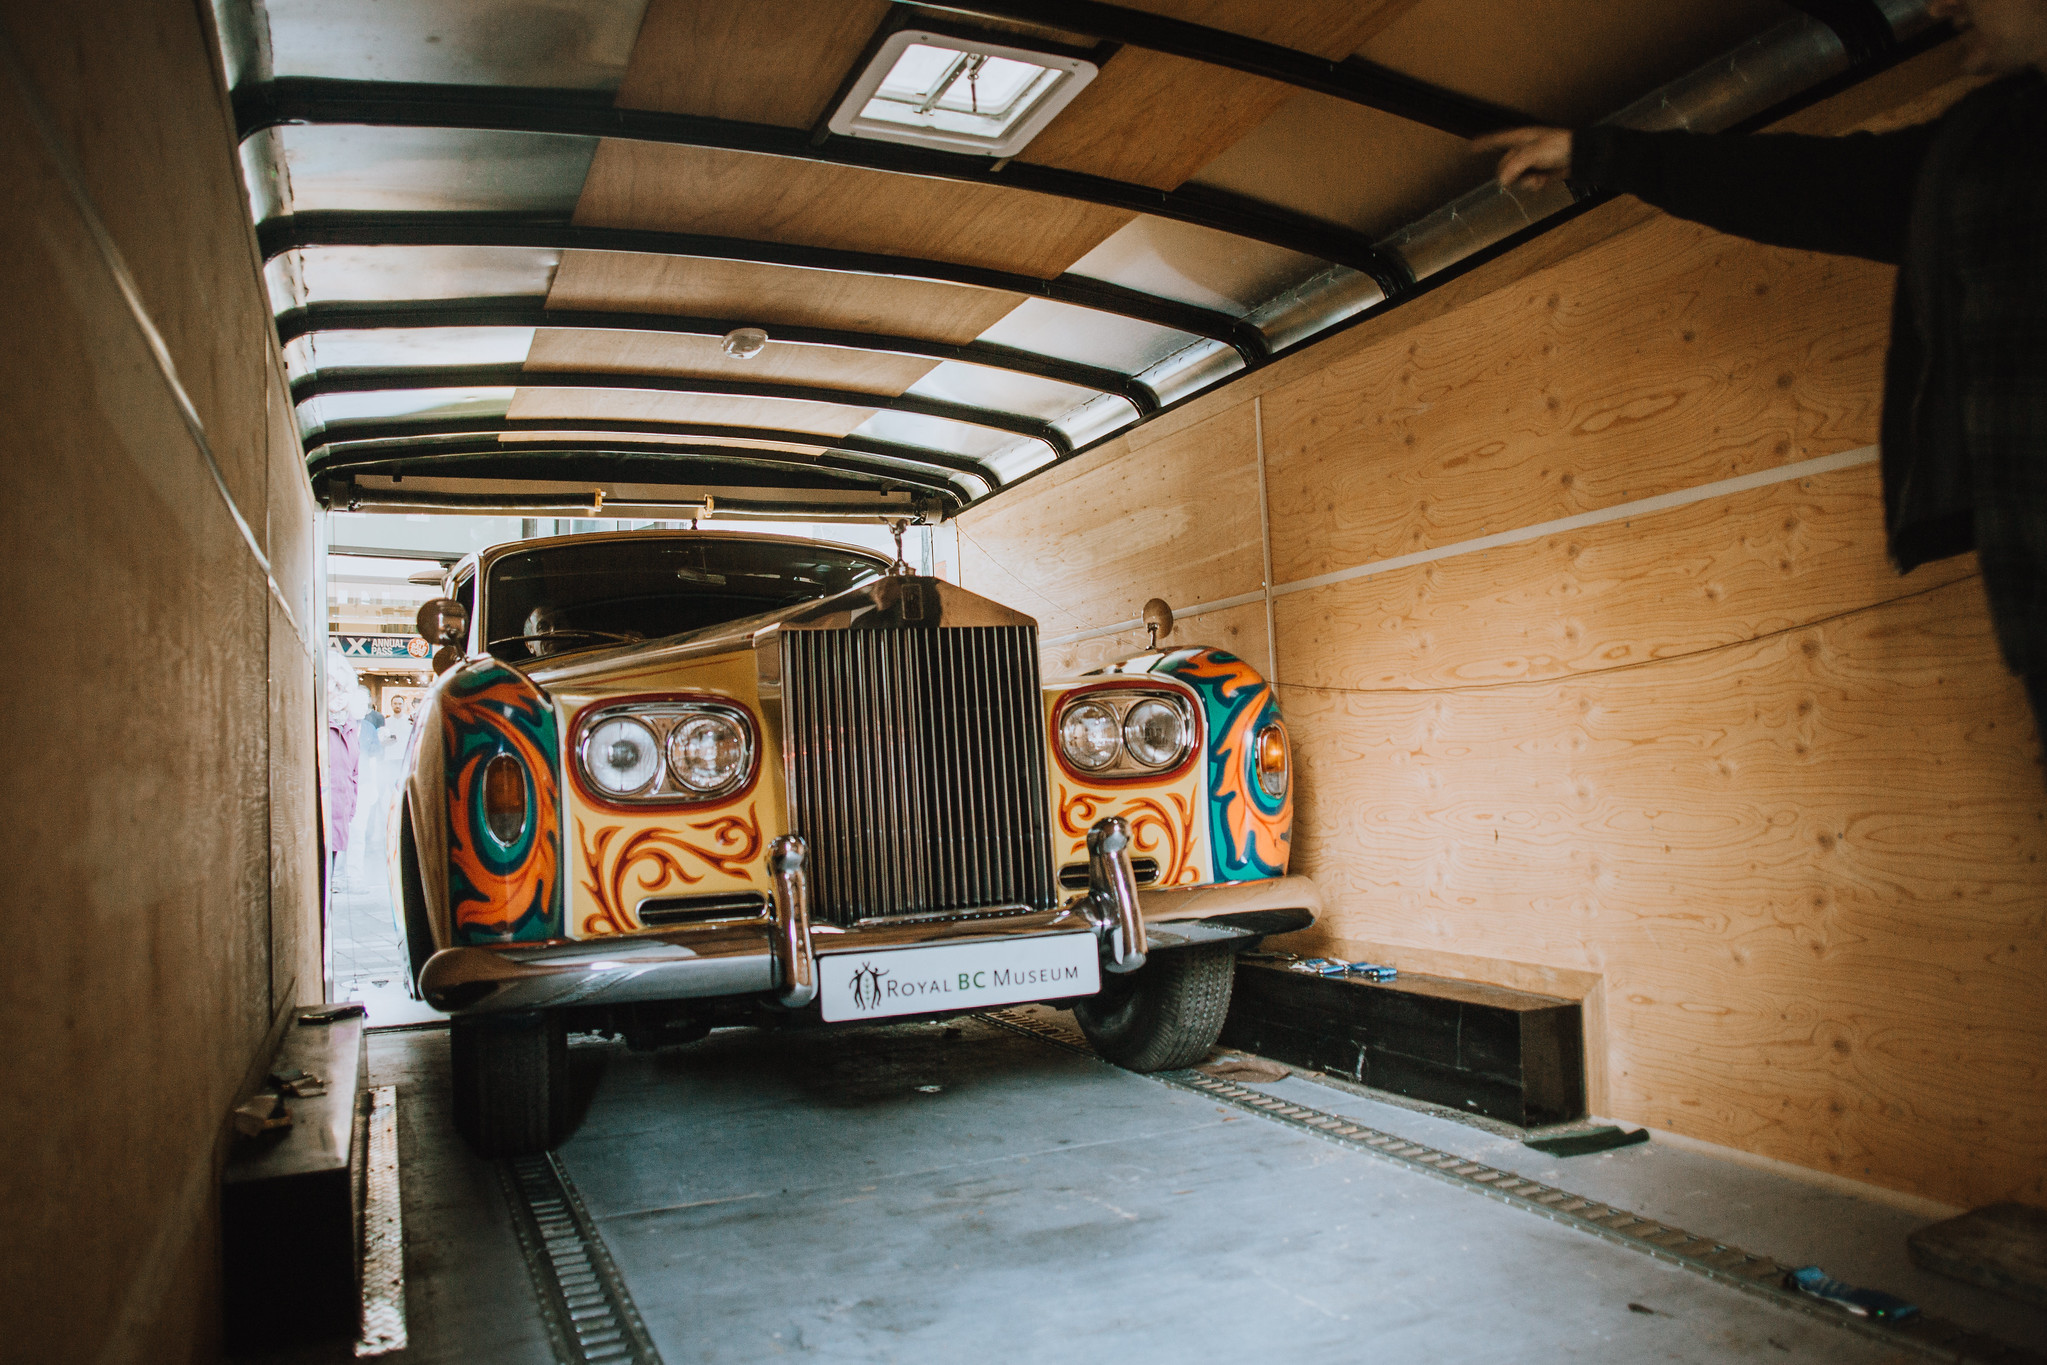 How John Lennon S Psychedelic Rolls Royce Ended Up In B C Montecristo